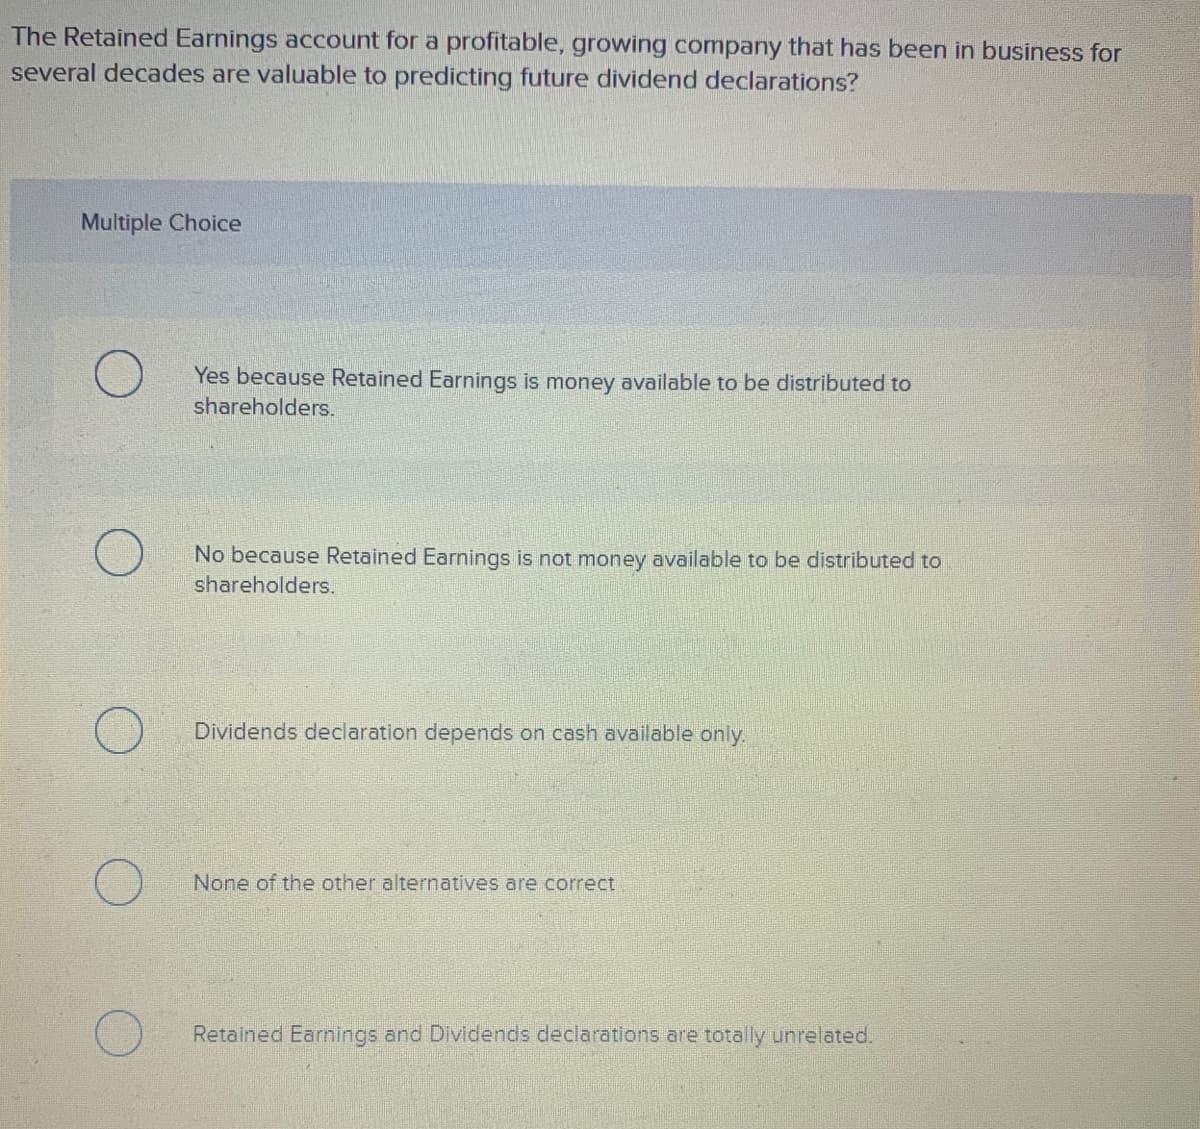 The Retained Earnings account for a profitable, growing company that has been in business for
several decades are valuable to predicting future dividend declarations?
Multiple Choice
Yes because Retained Earnings is money available to be distributed to
shareholders.
No because Retained Earnings is not money available to be distributed to
shareholders.
Dividends declaration depends on cash available only.
None of the other alternatives are correct
Retained Earnings and Dividends declarations are totally unrelated.